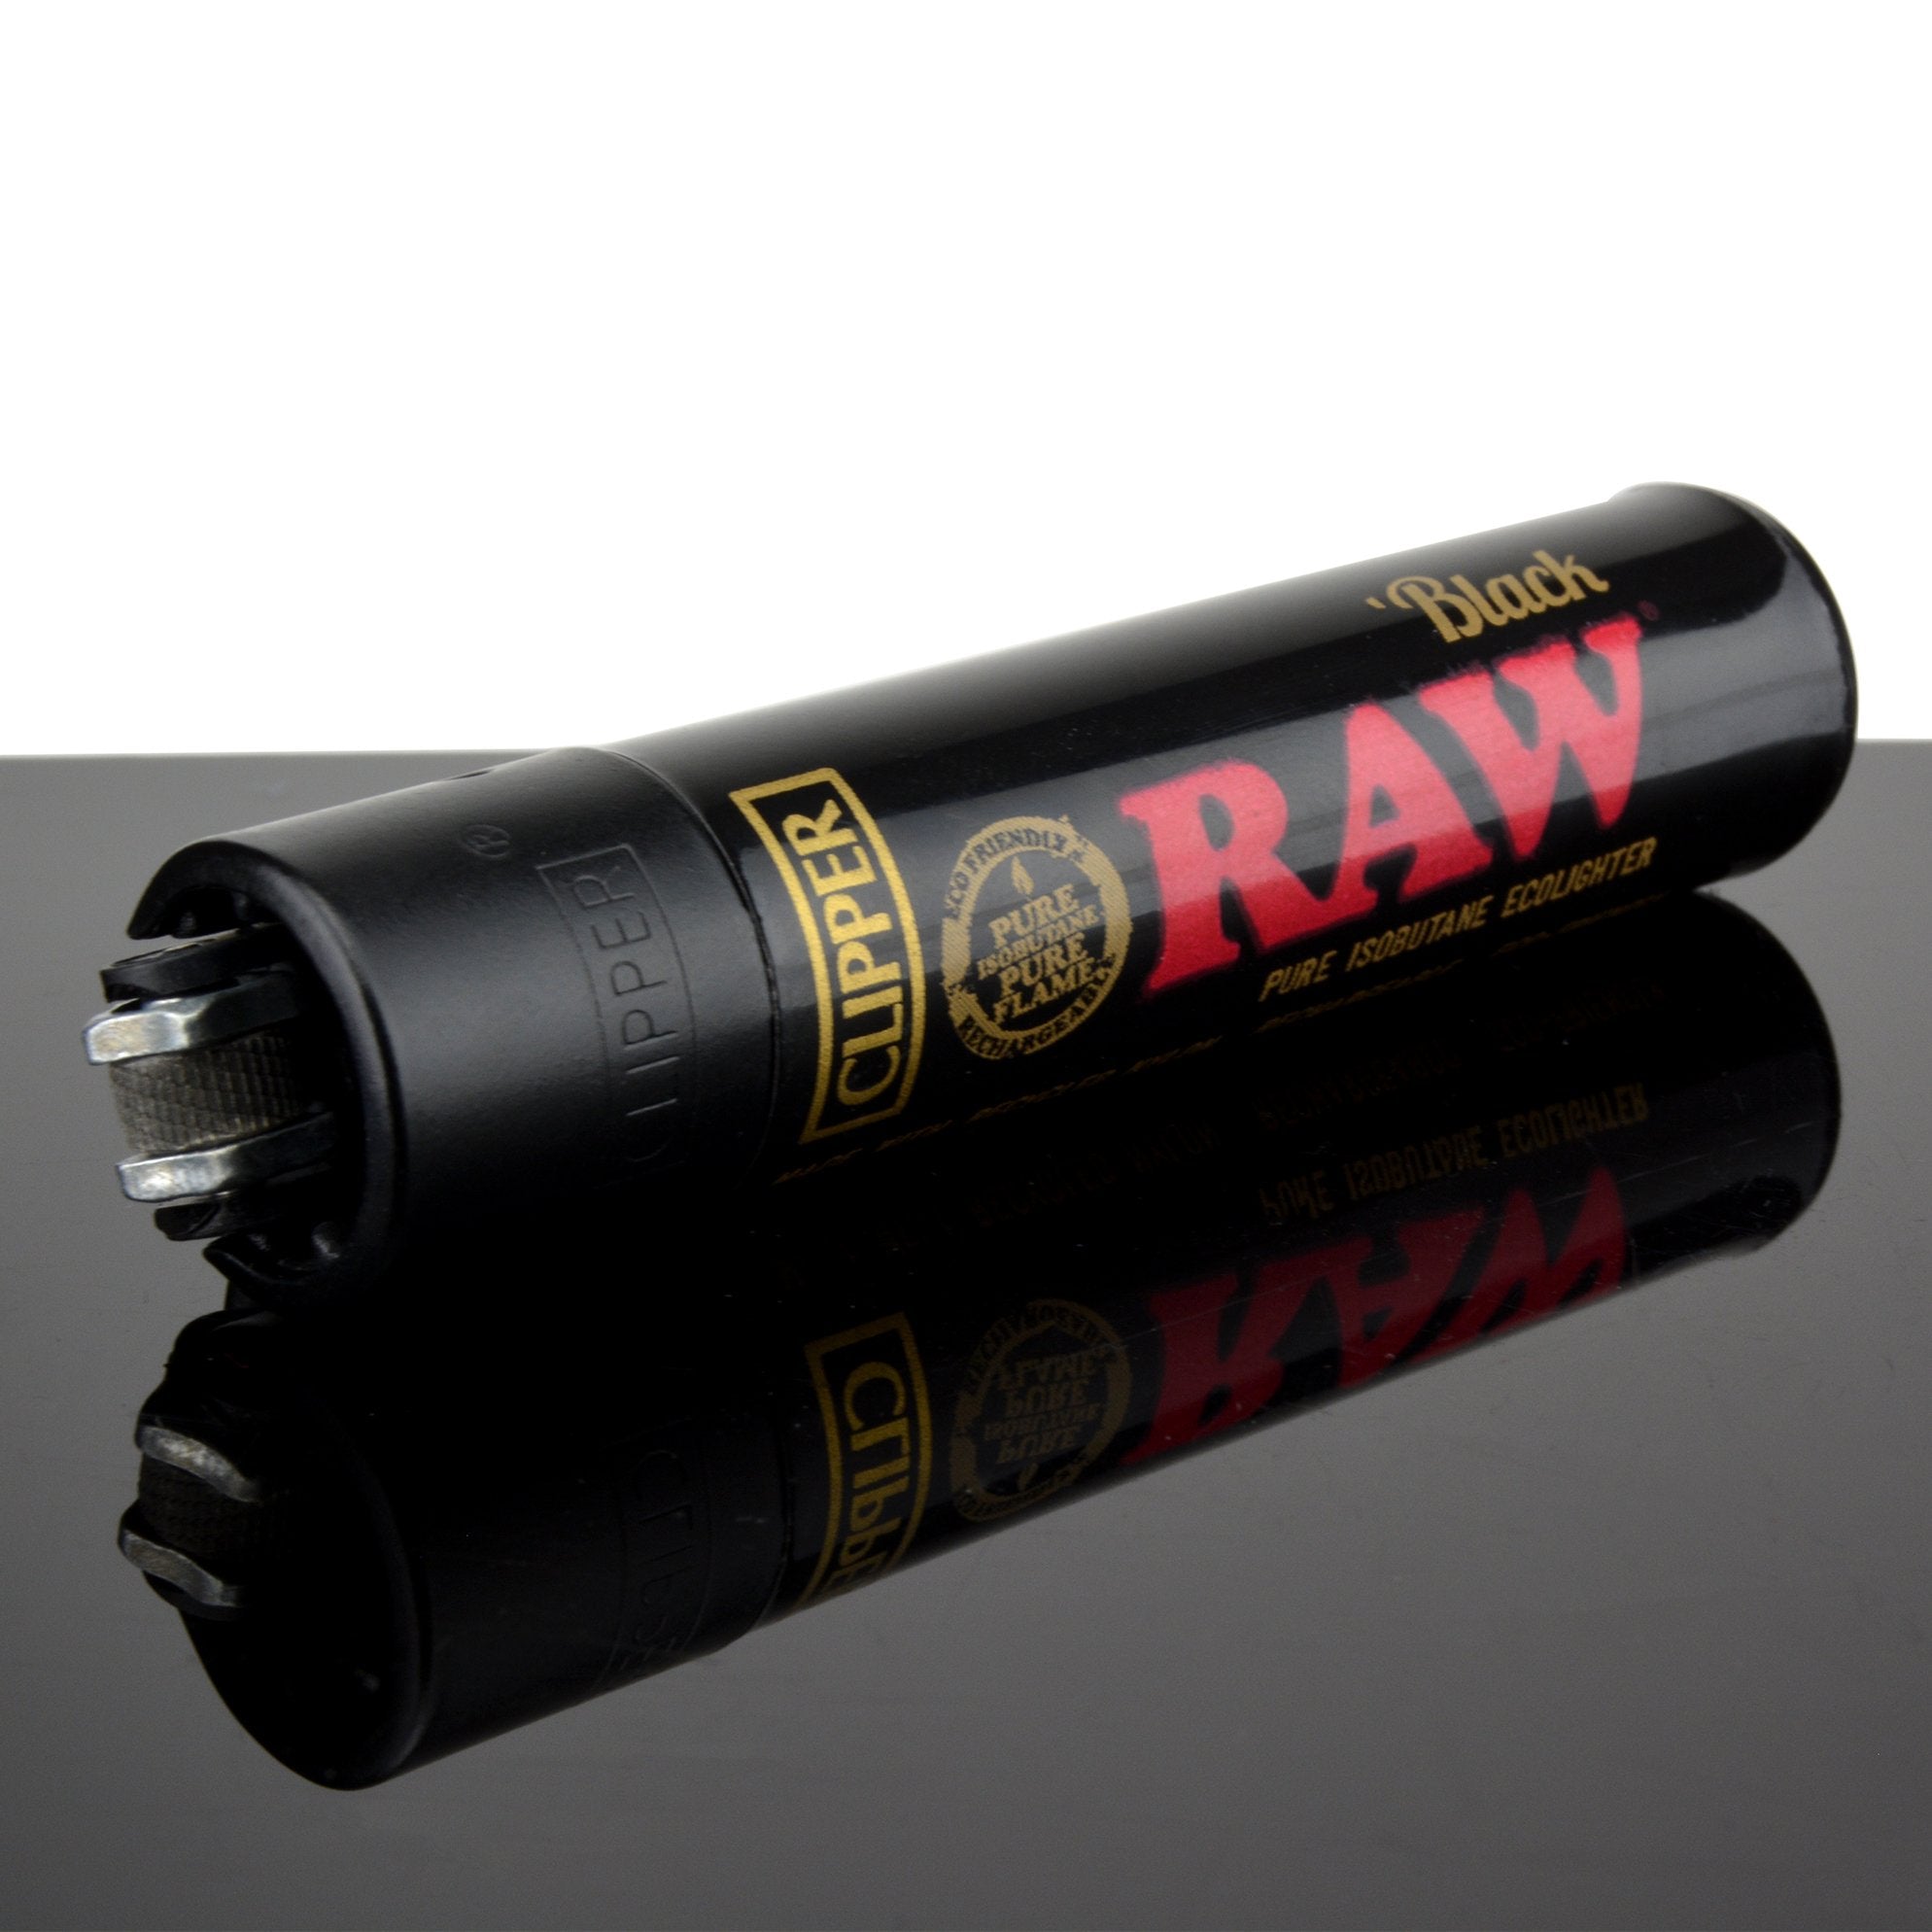 CLIPPER | 'Retail Display' Lighter RAW Logo Black & Gold - 48 Count - 3